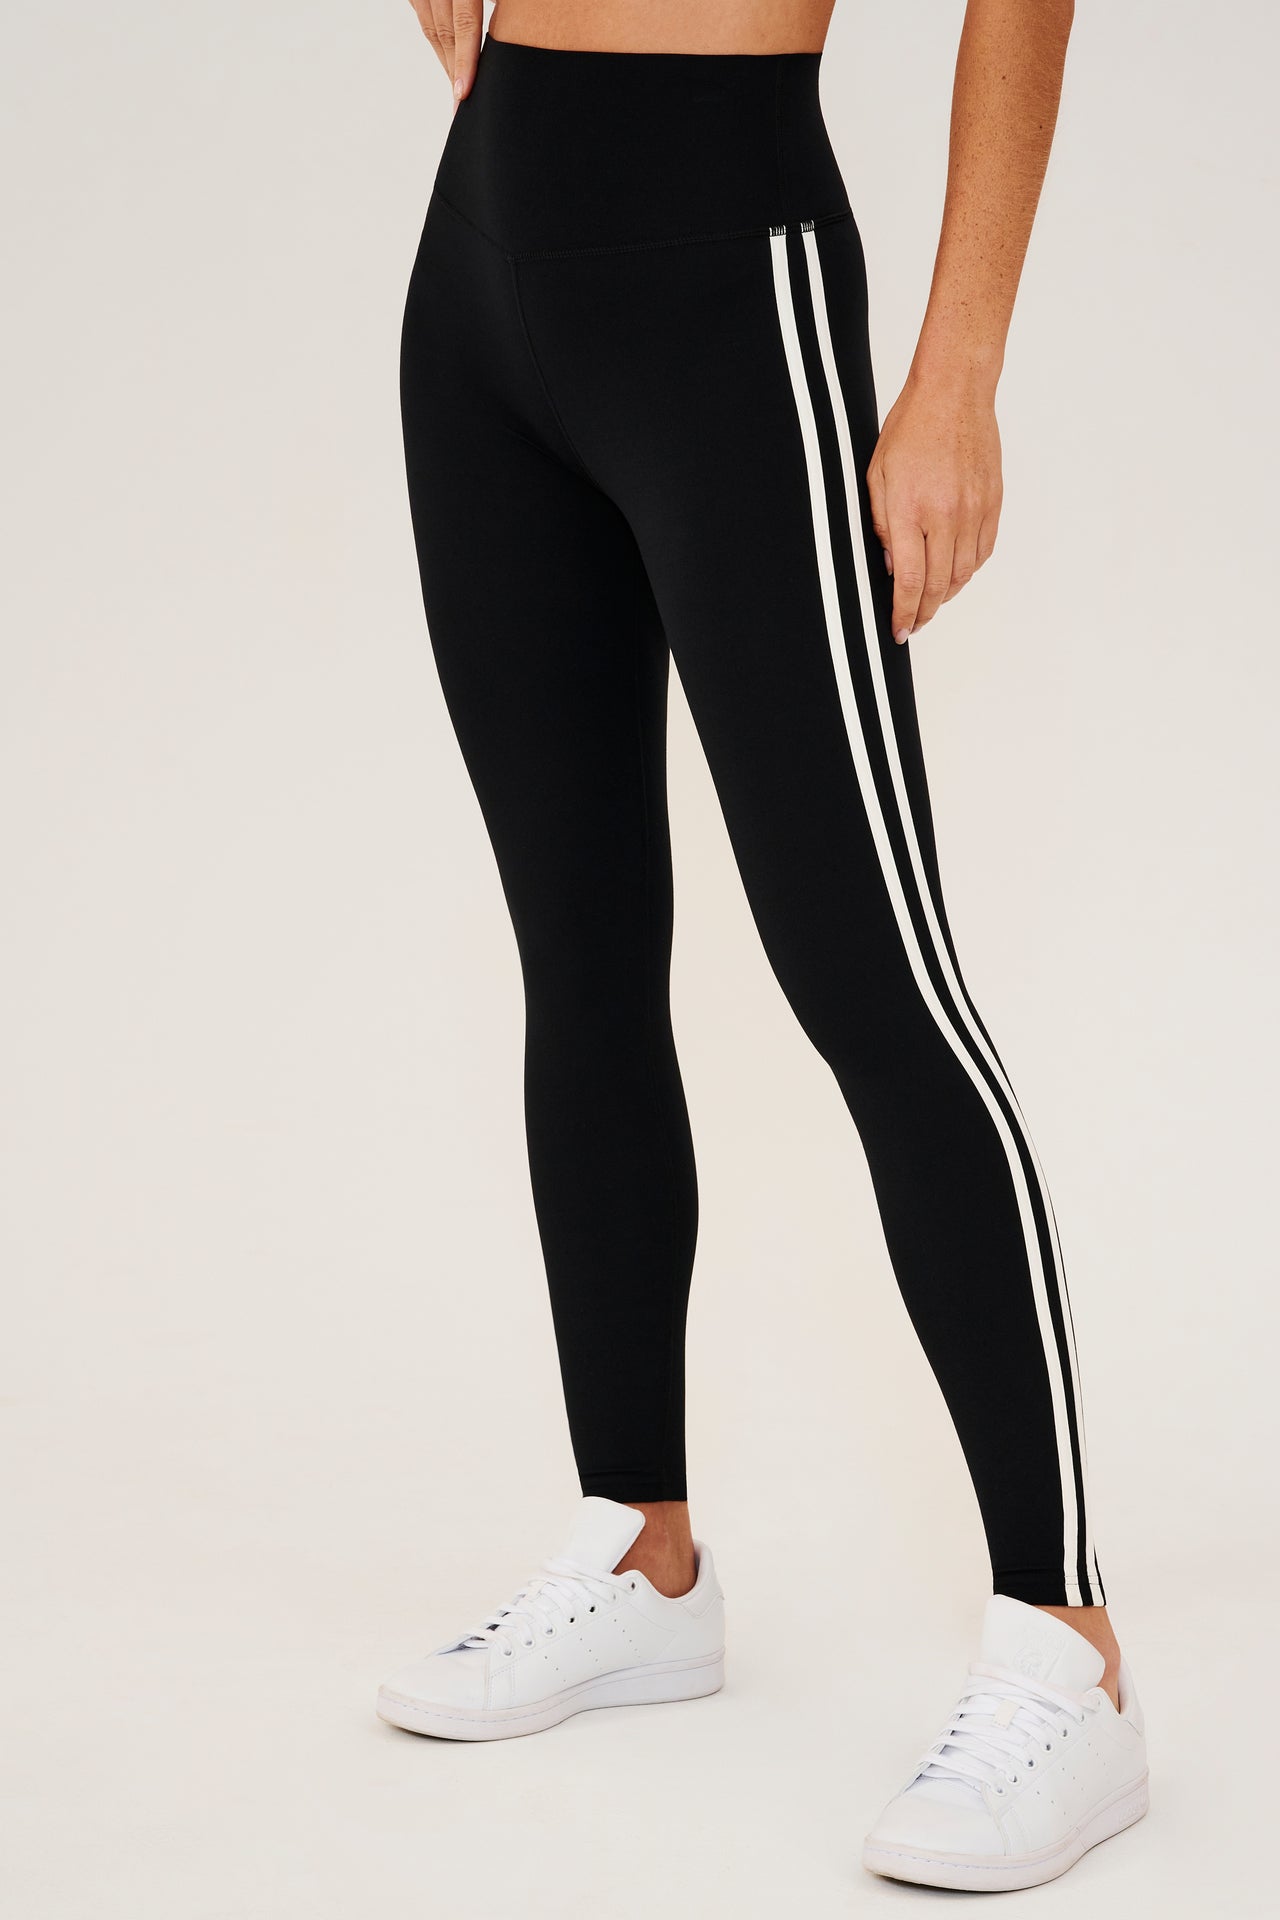 Side view of girl wearing black leggings with two thin white stripes down the side with white shoes